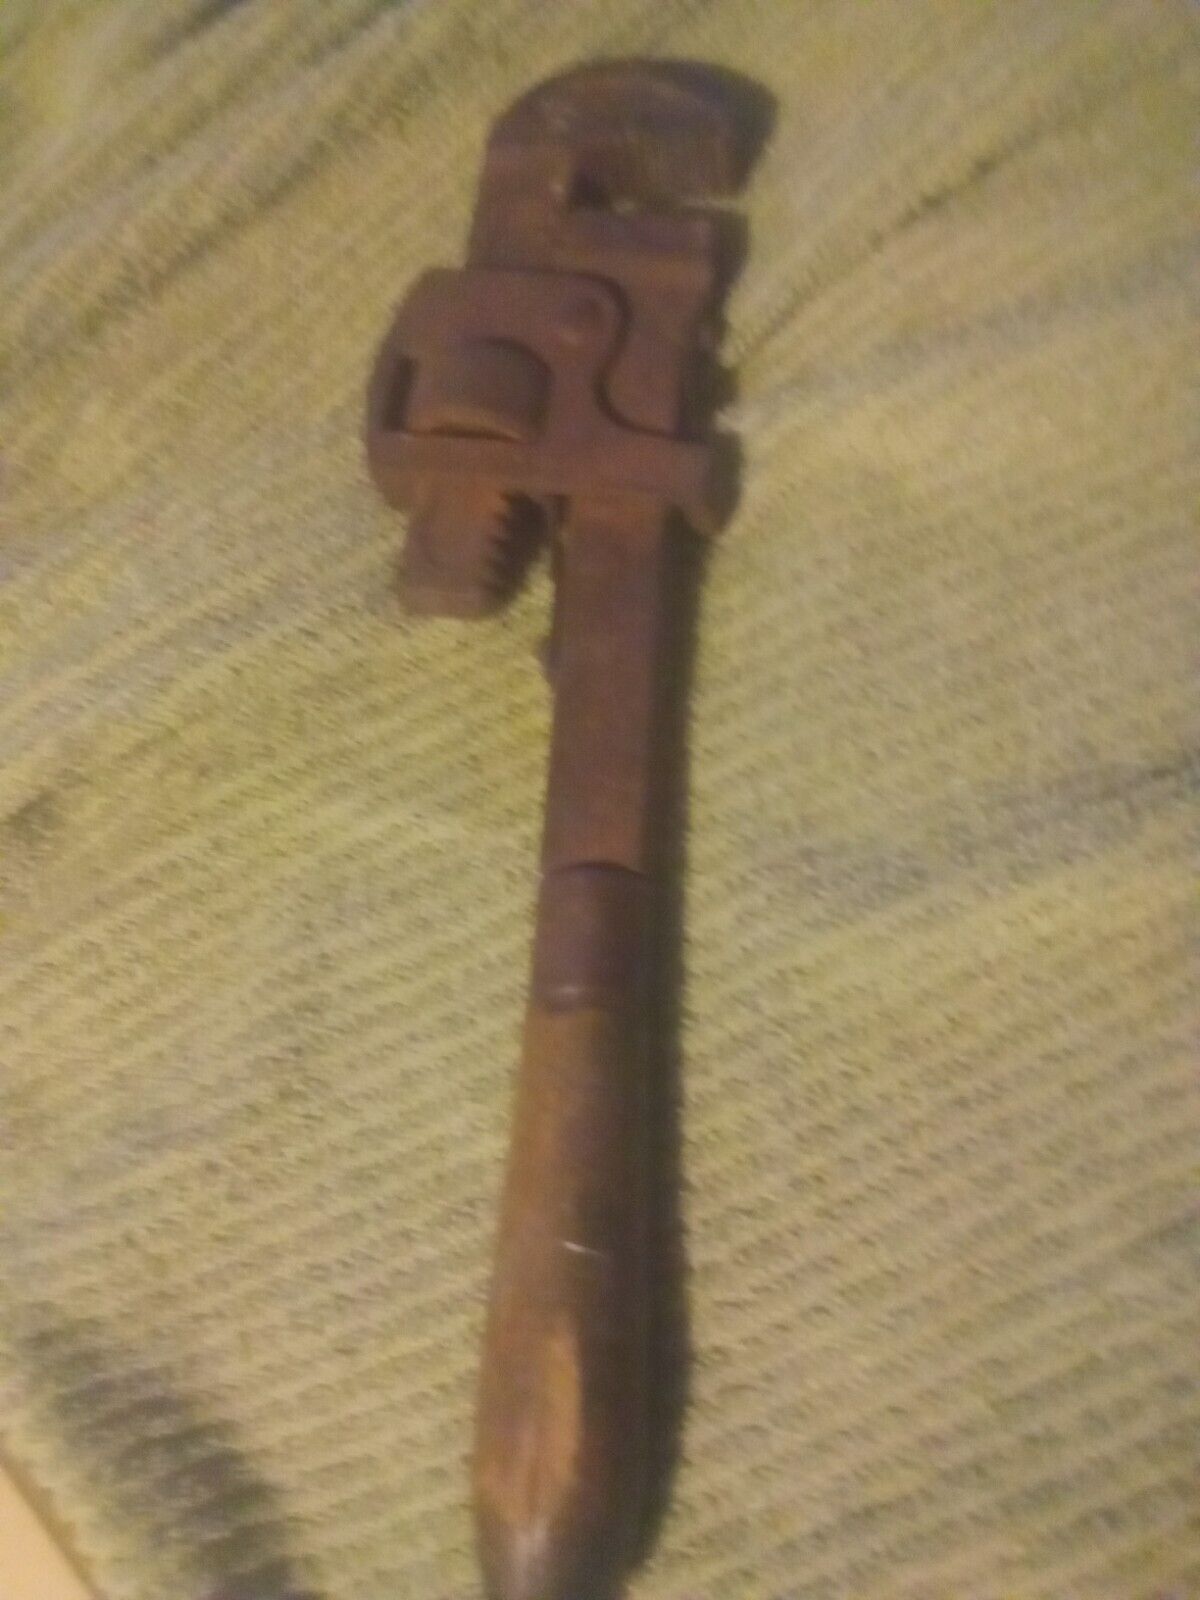 Vintage Pipe Wrench